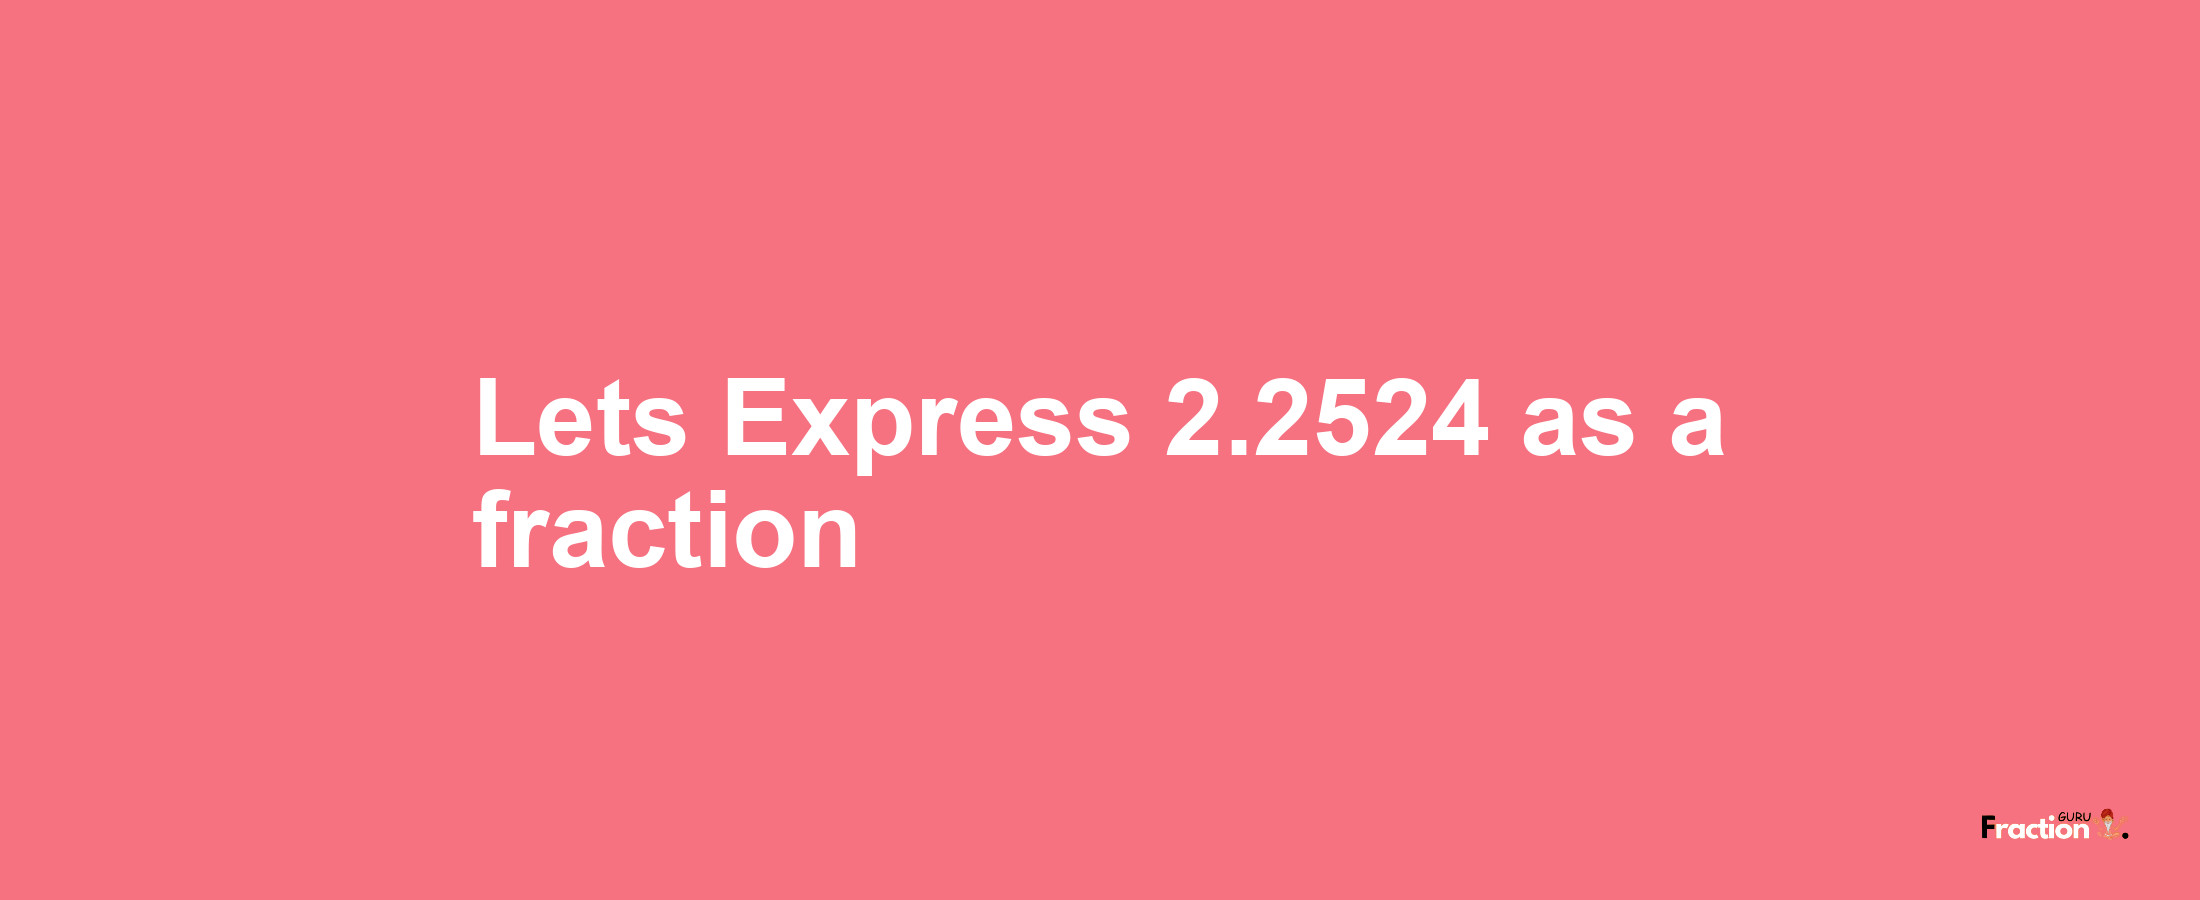 Lets Express 2.2524 as afraction